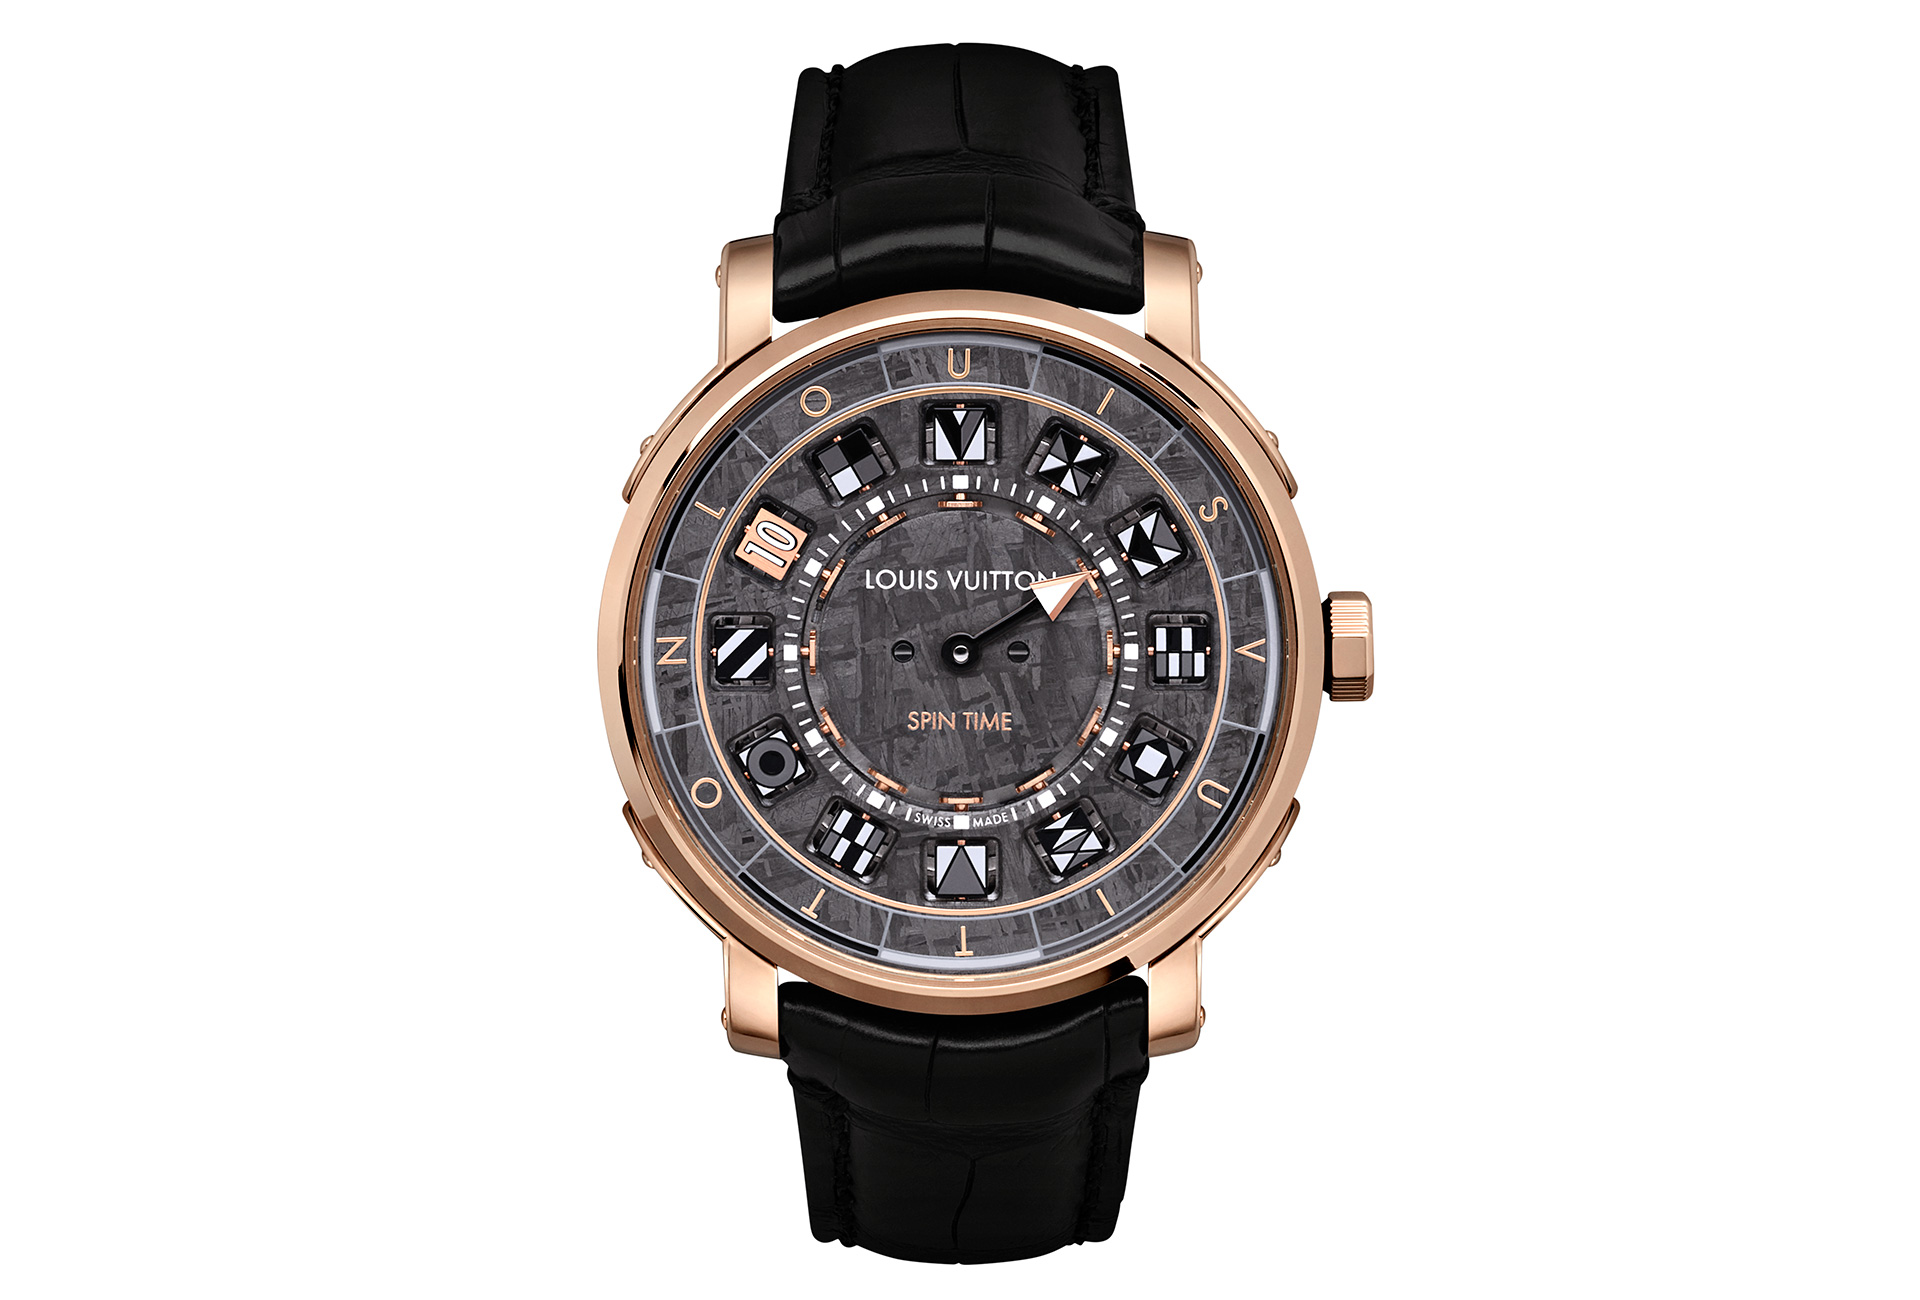 Meteorite stone adorns the Louis Vuitton Escale Spin Time – FHH Journal